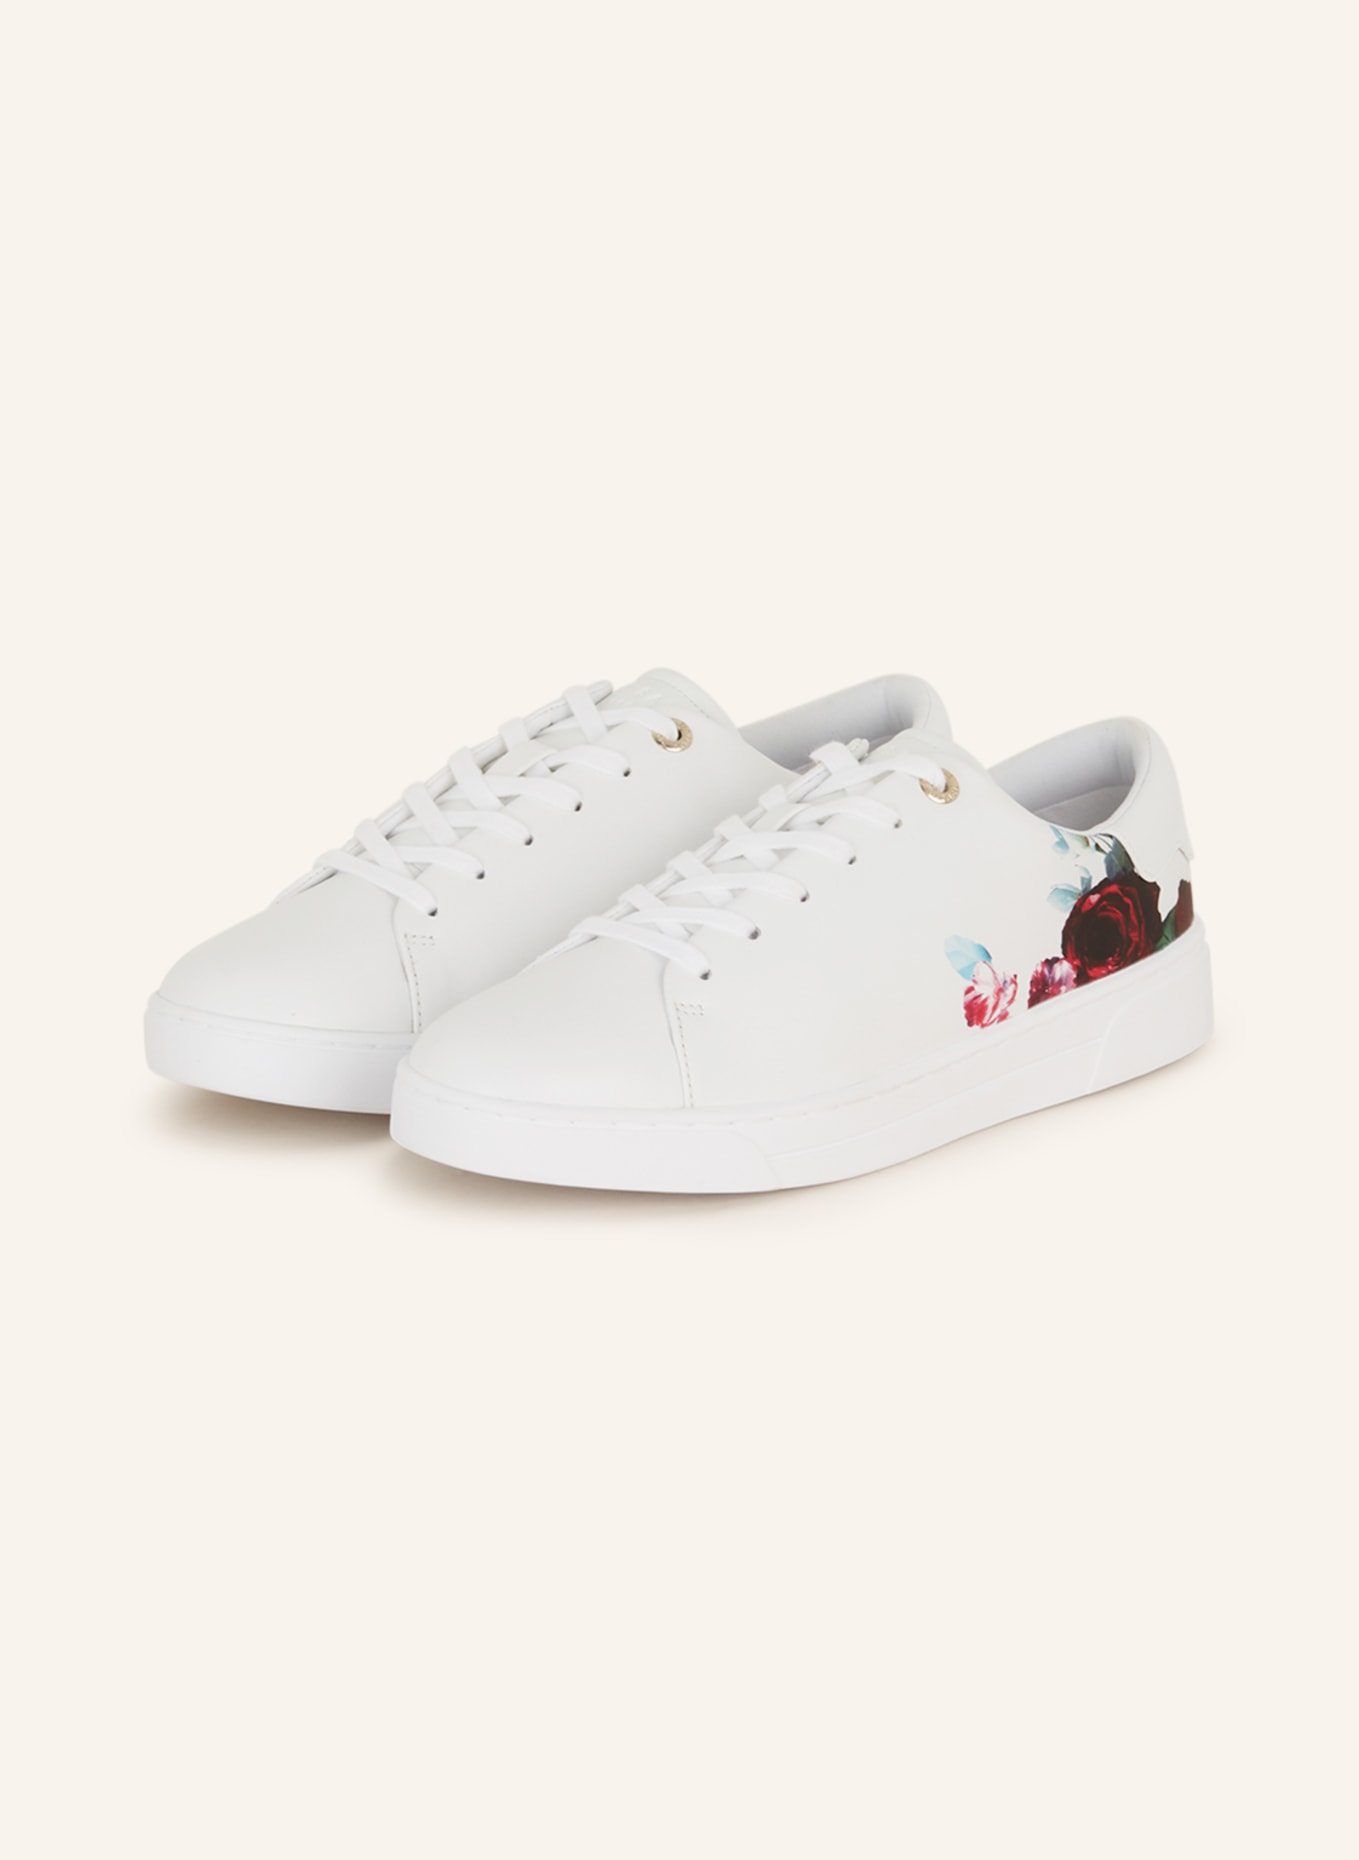 Ted Baker Sneakers for Men - Shop Now on FARFETCH